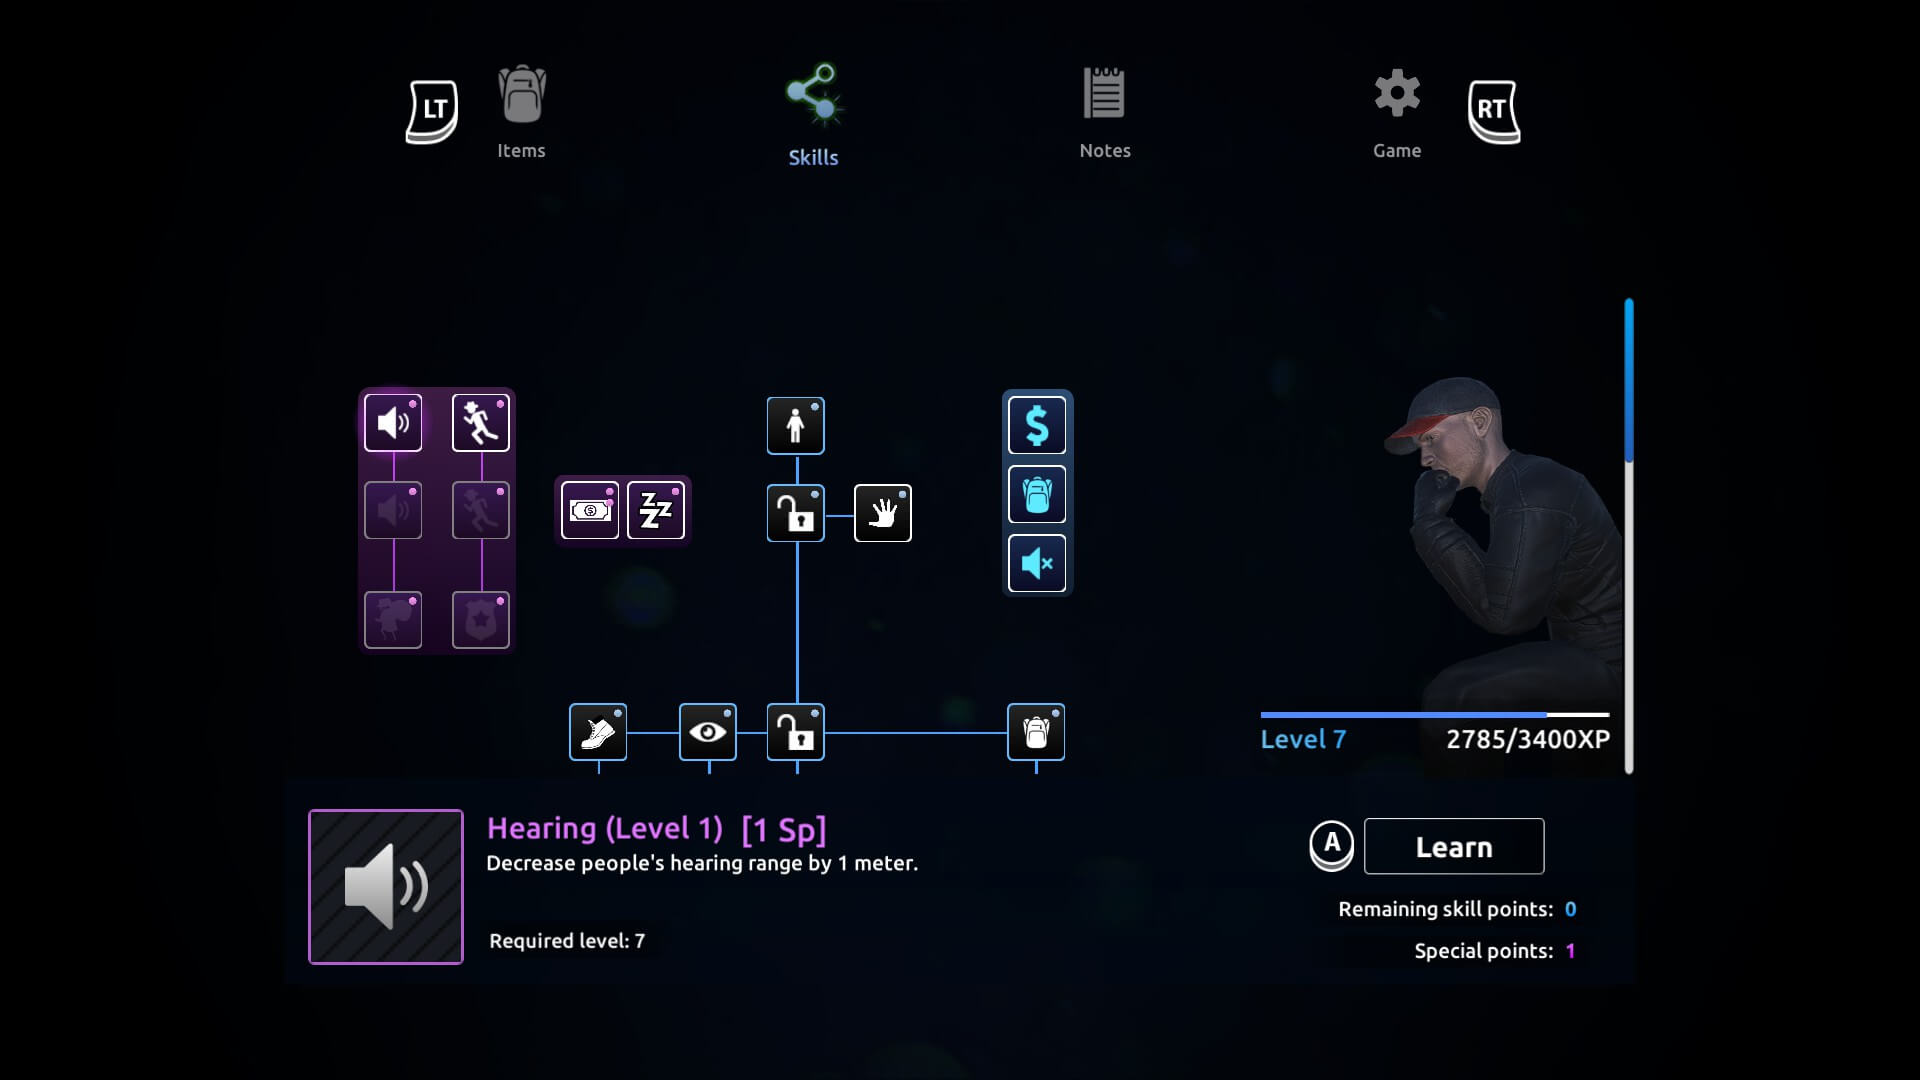 The skill tree found in the game. The blue dot shows that I have purchased that skill while a grey box means I haven't. The large purple square on the left is for a special type of skill points that can't be earned.